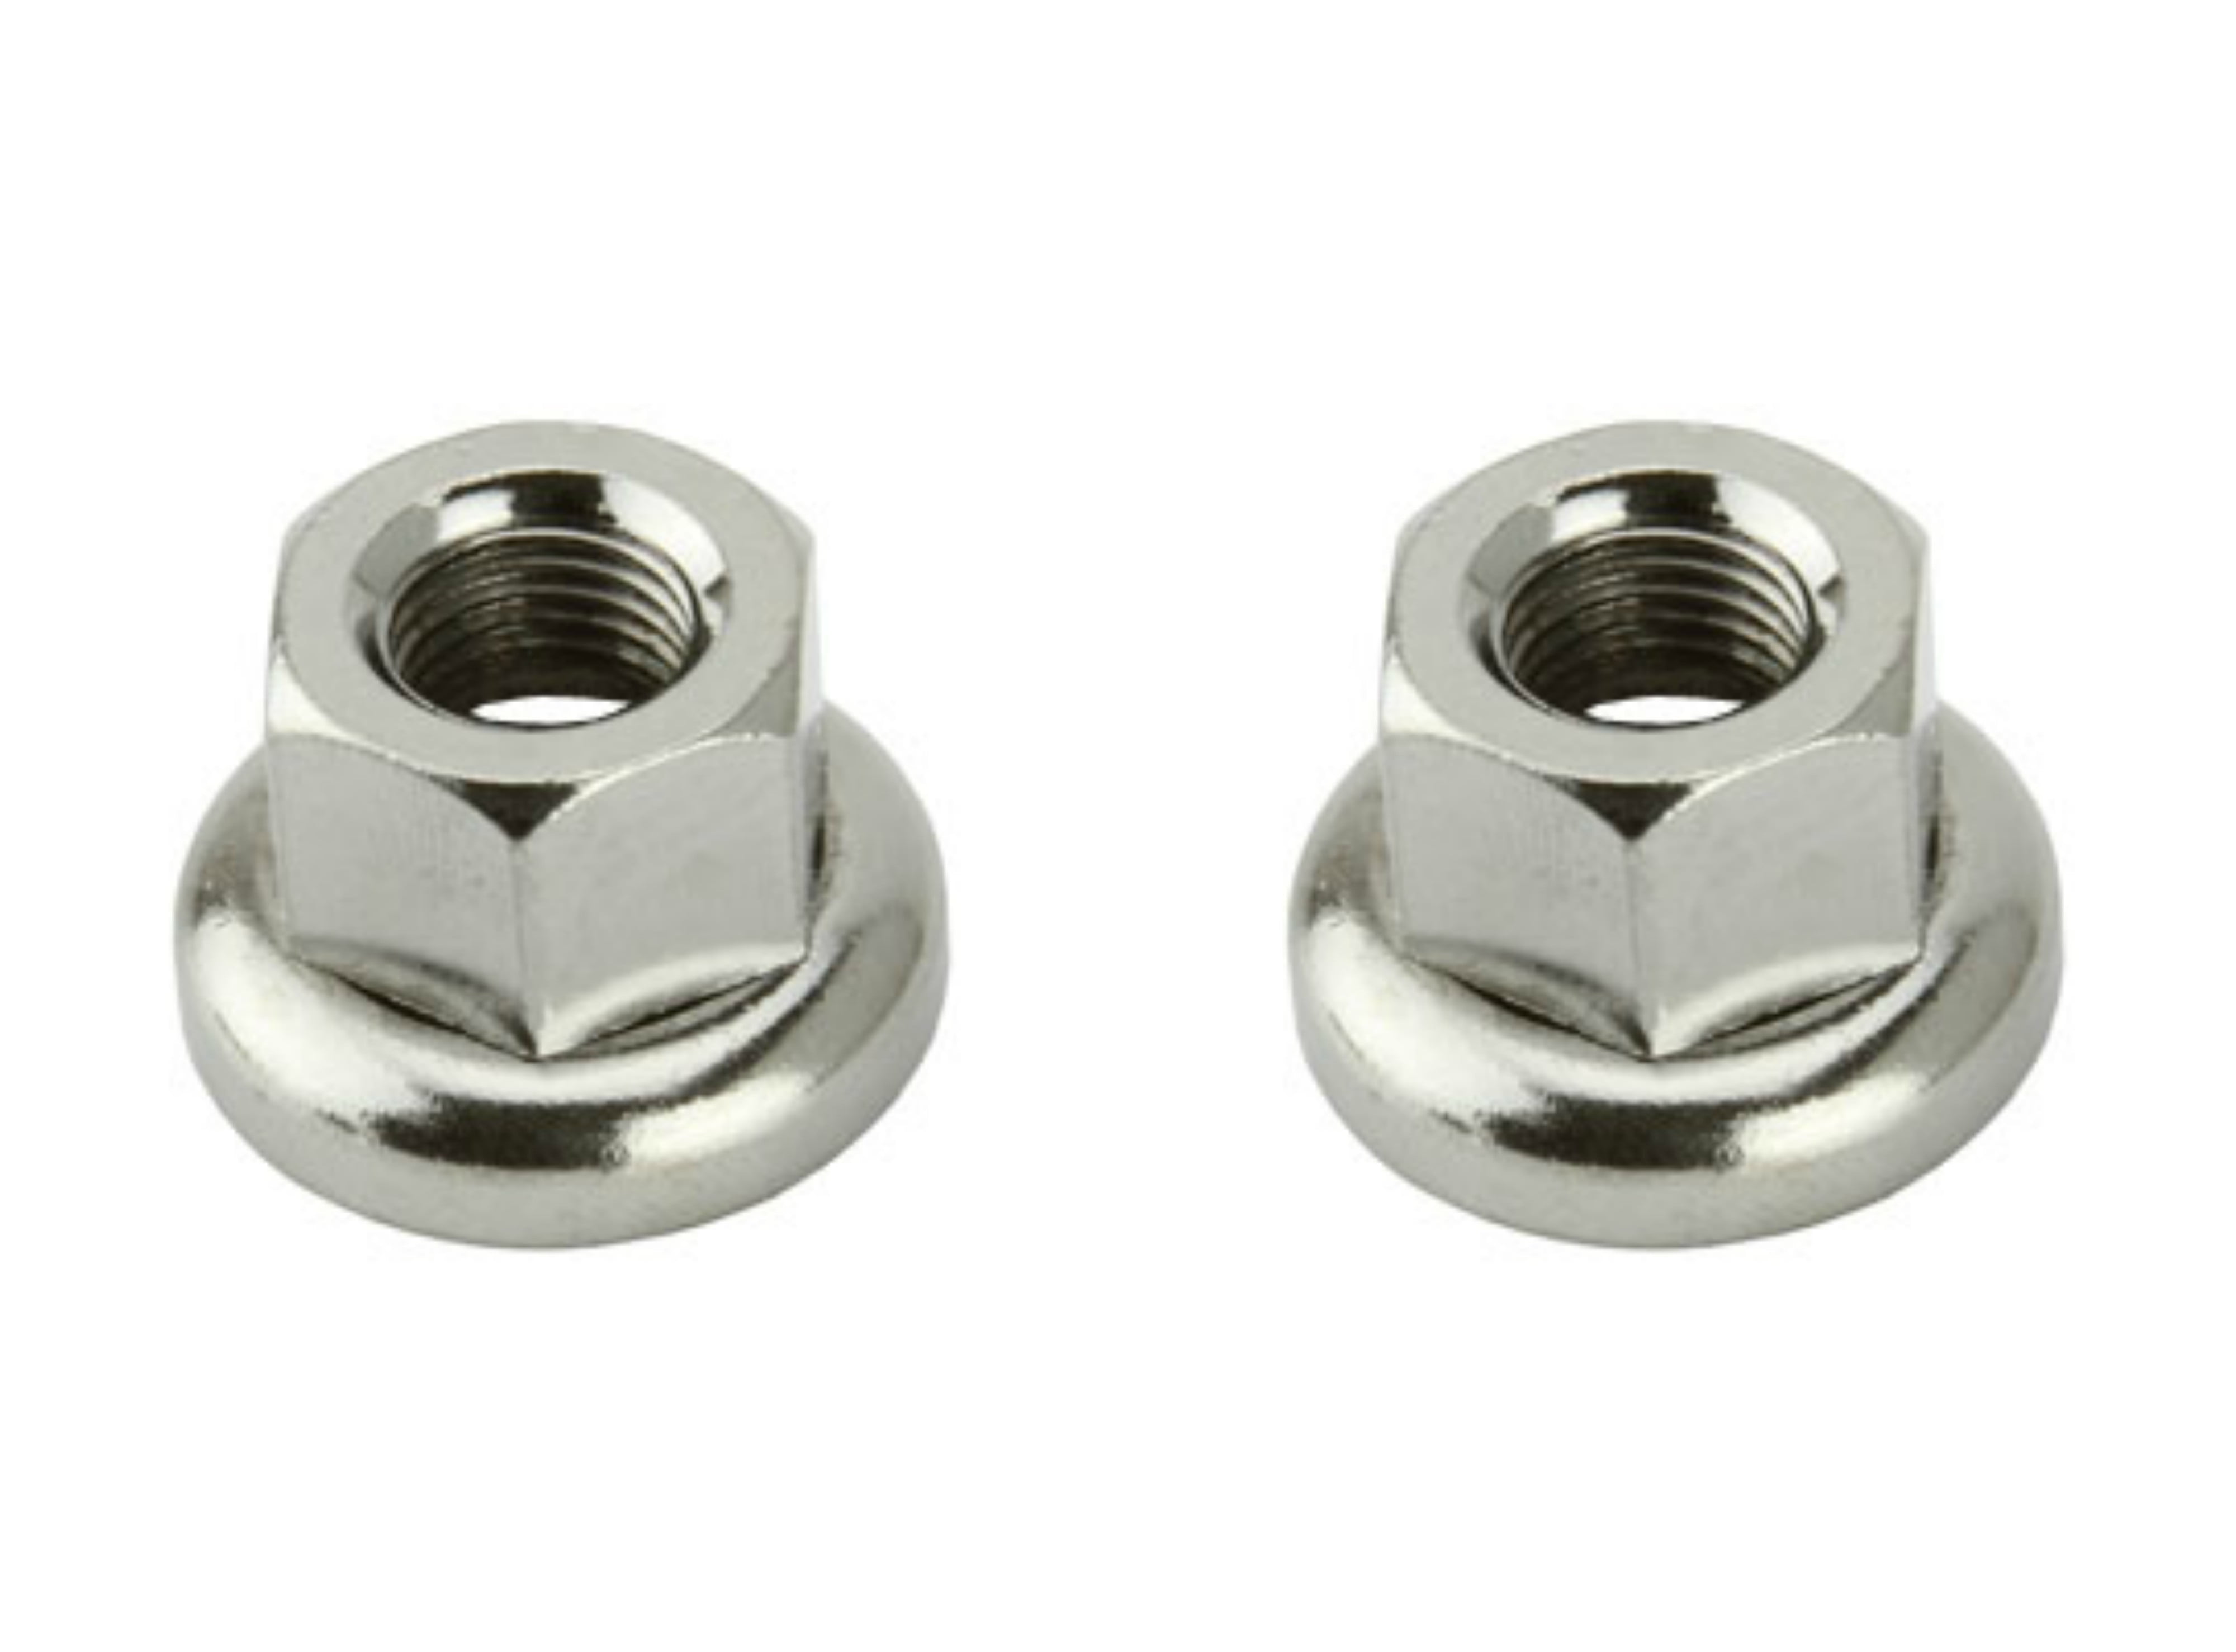 BICYCLE BIKE 1 SET OF Twisted Square Nut AXLE BOLT 3/8" x 24t Chrome A PAIR 